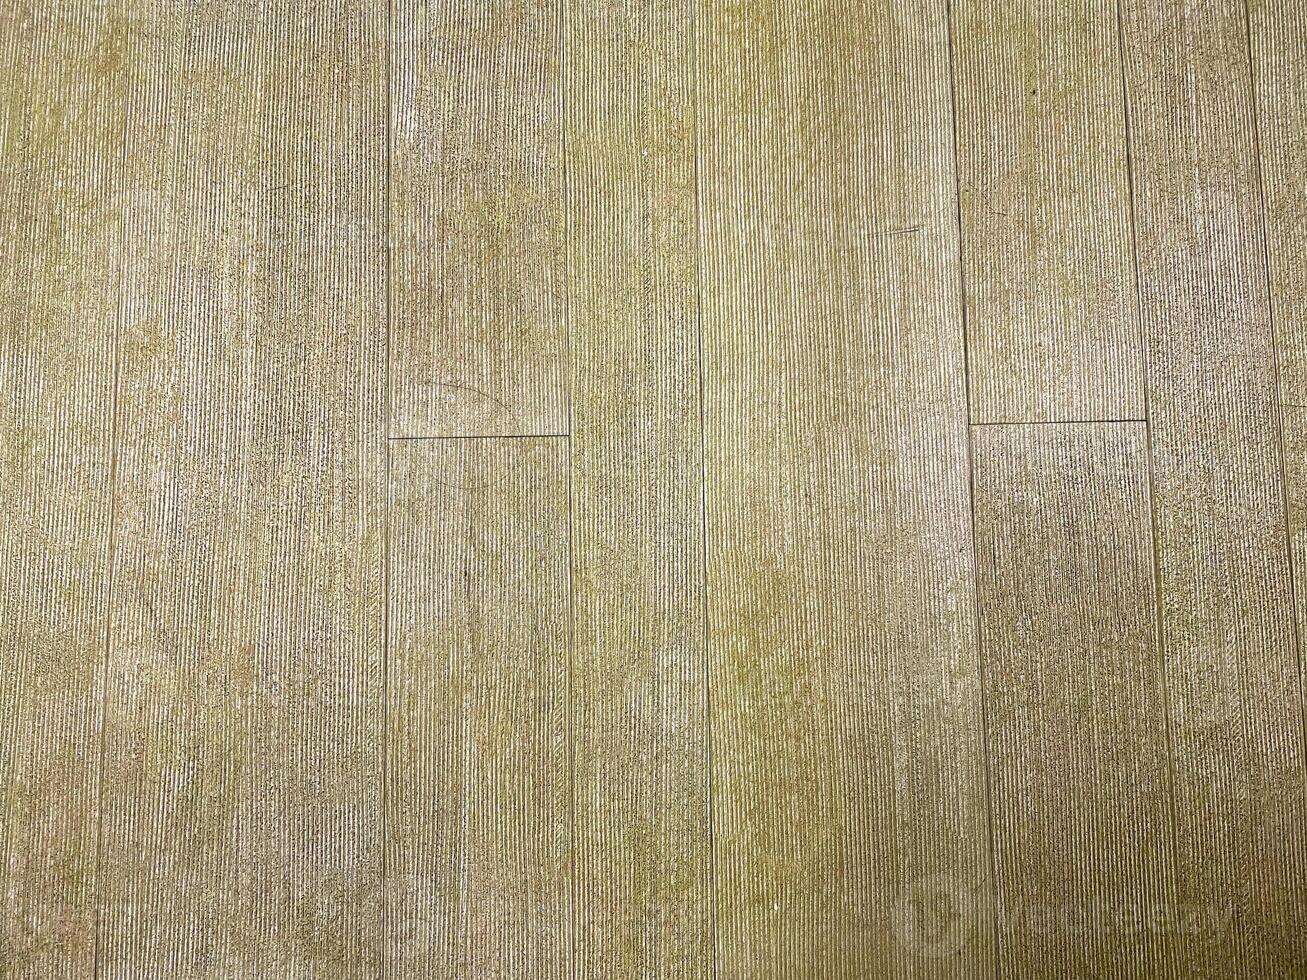 close-up shot of timber planks forming a seamless wooden floor surface. photo